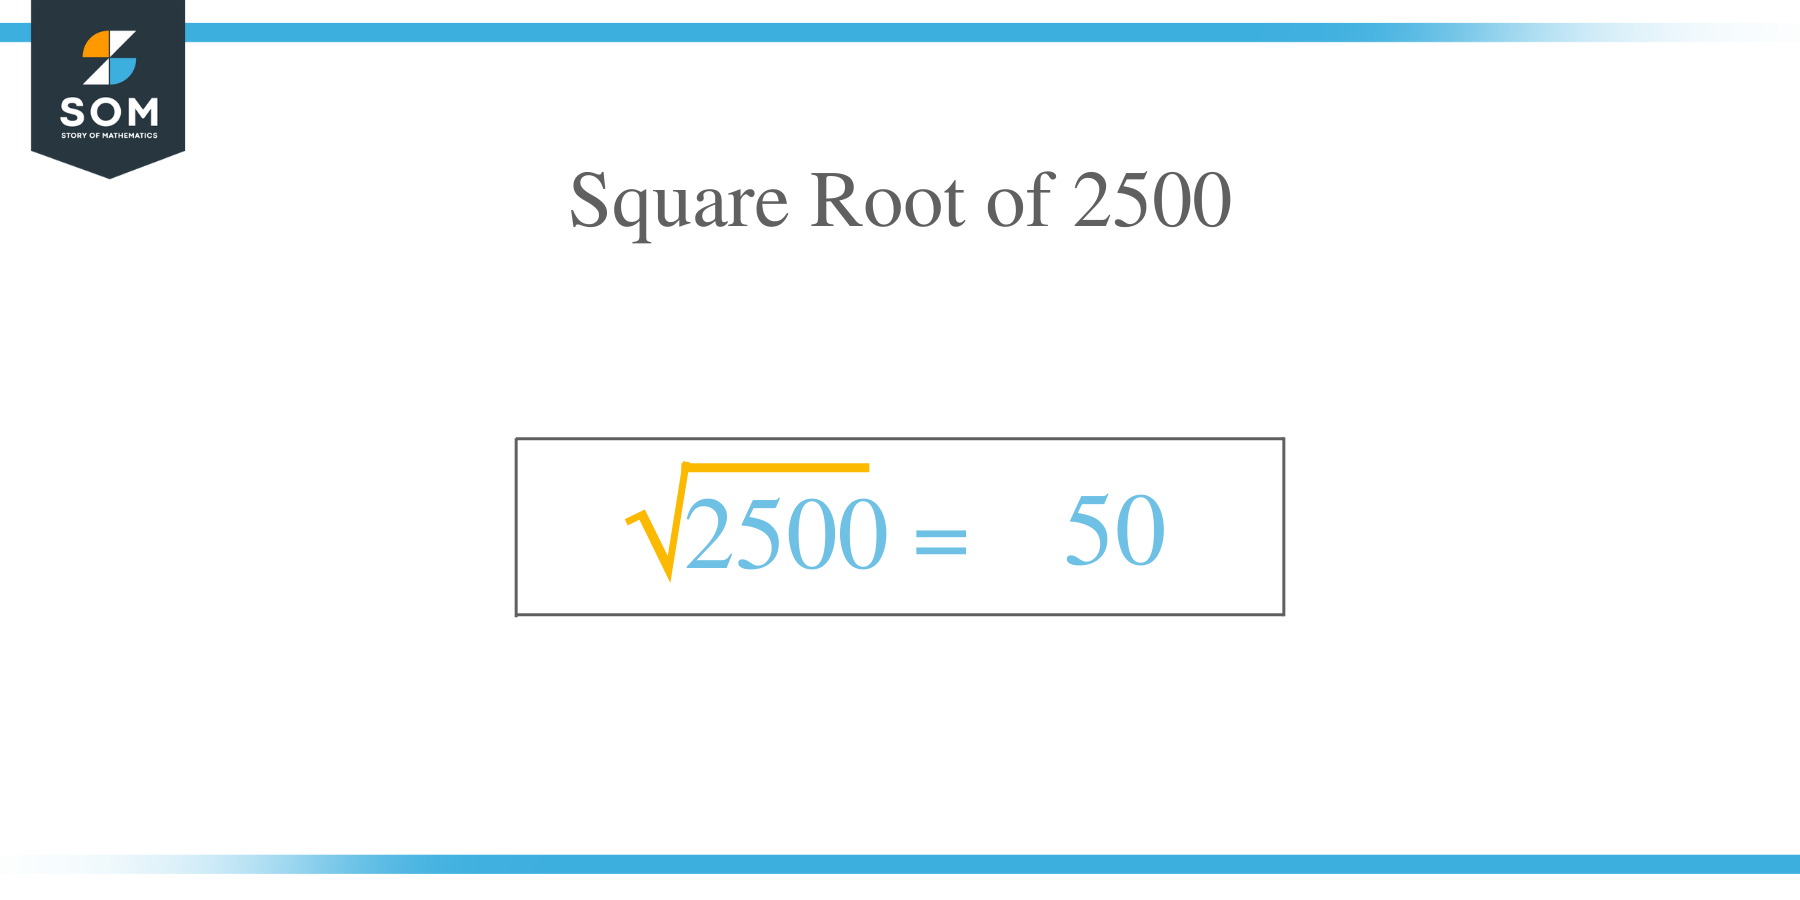 Square Root of 2500